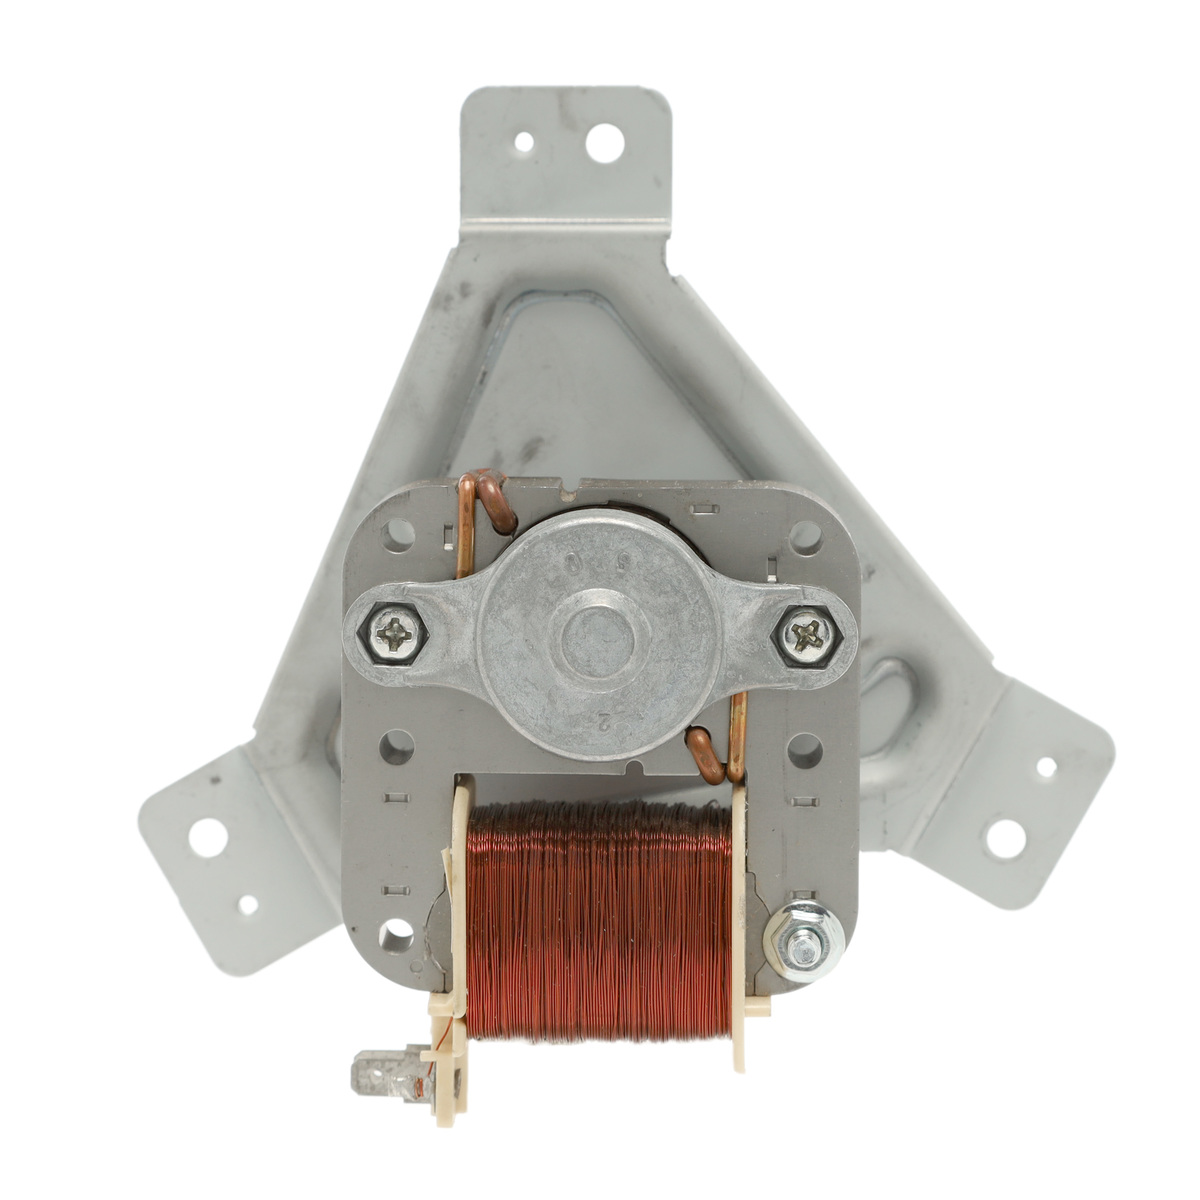 Samsung Range Oven Convection Reverse Fan Conversion Motor Assembly. Part #DG96-00110B-USED